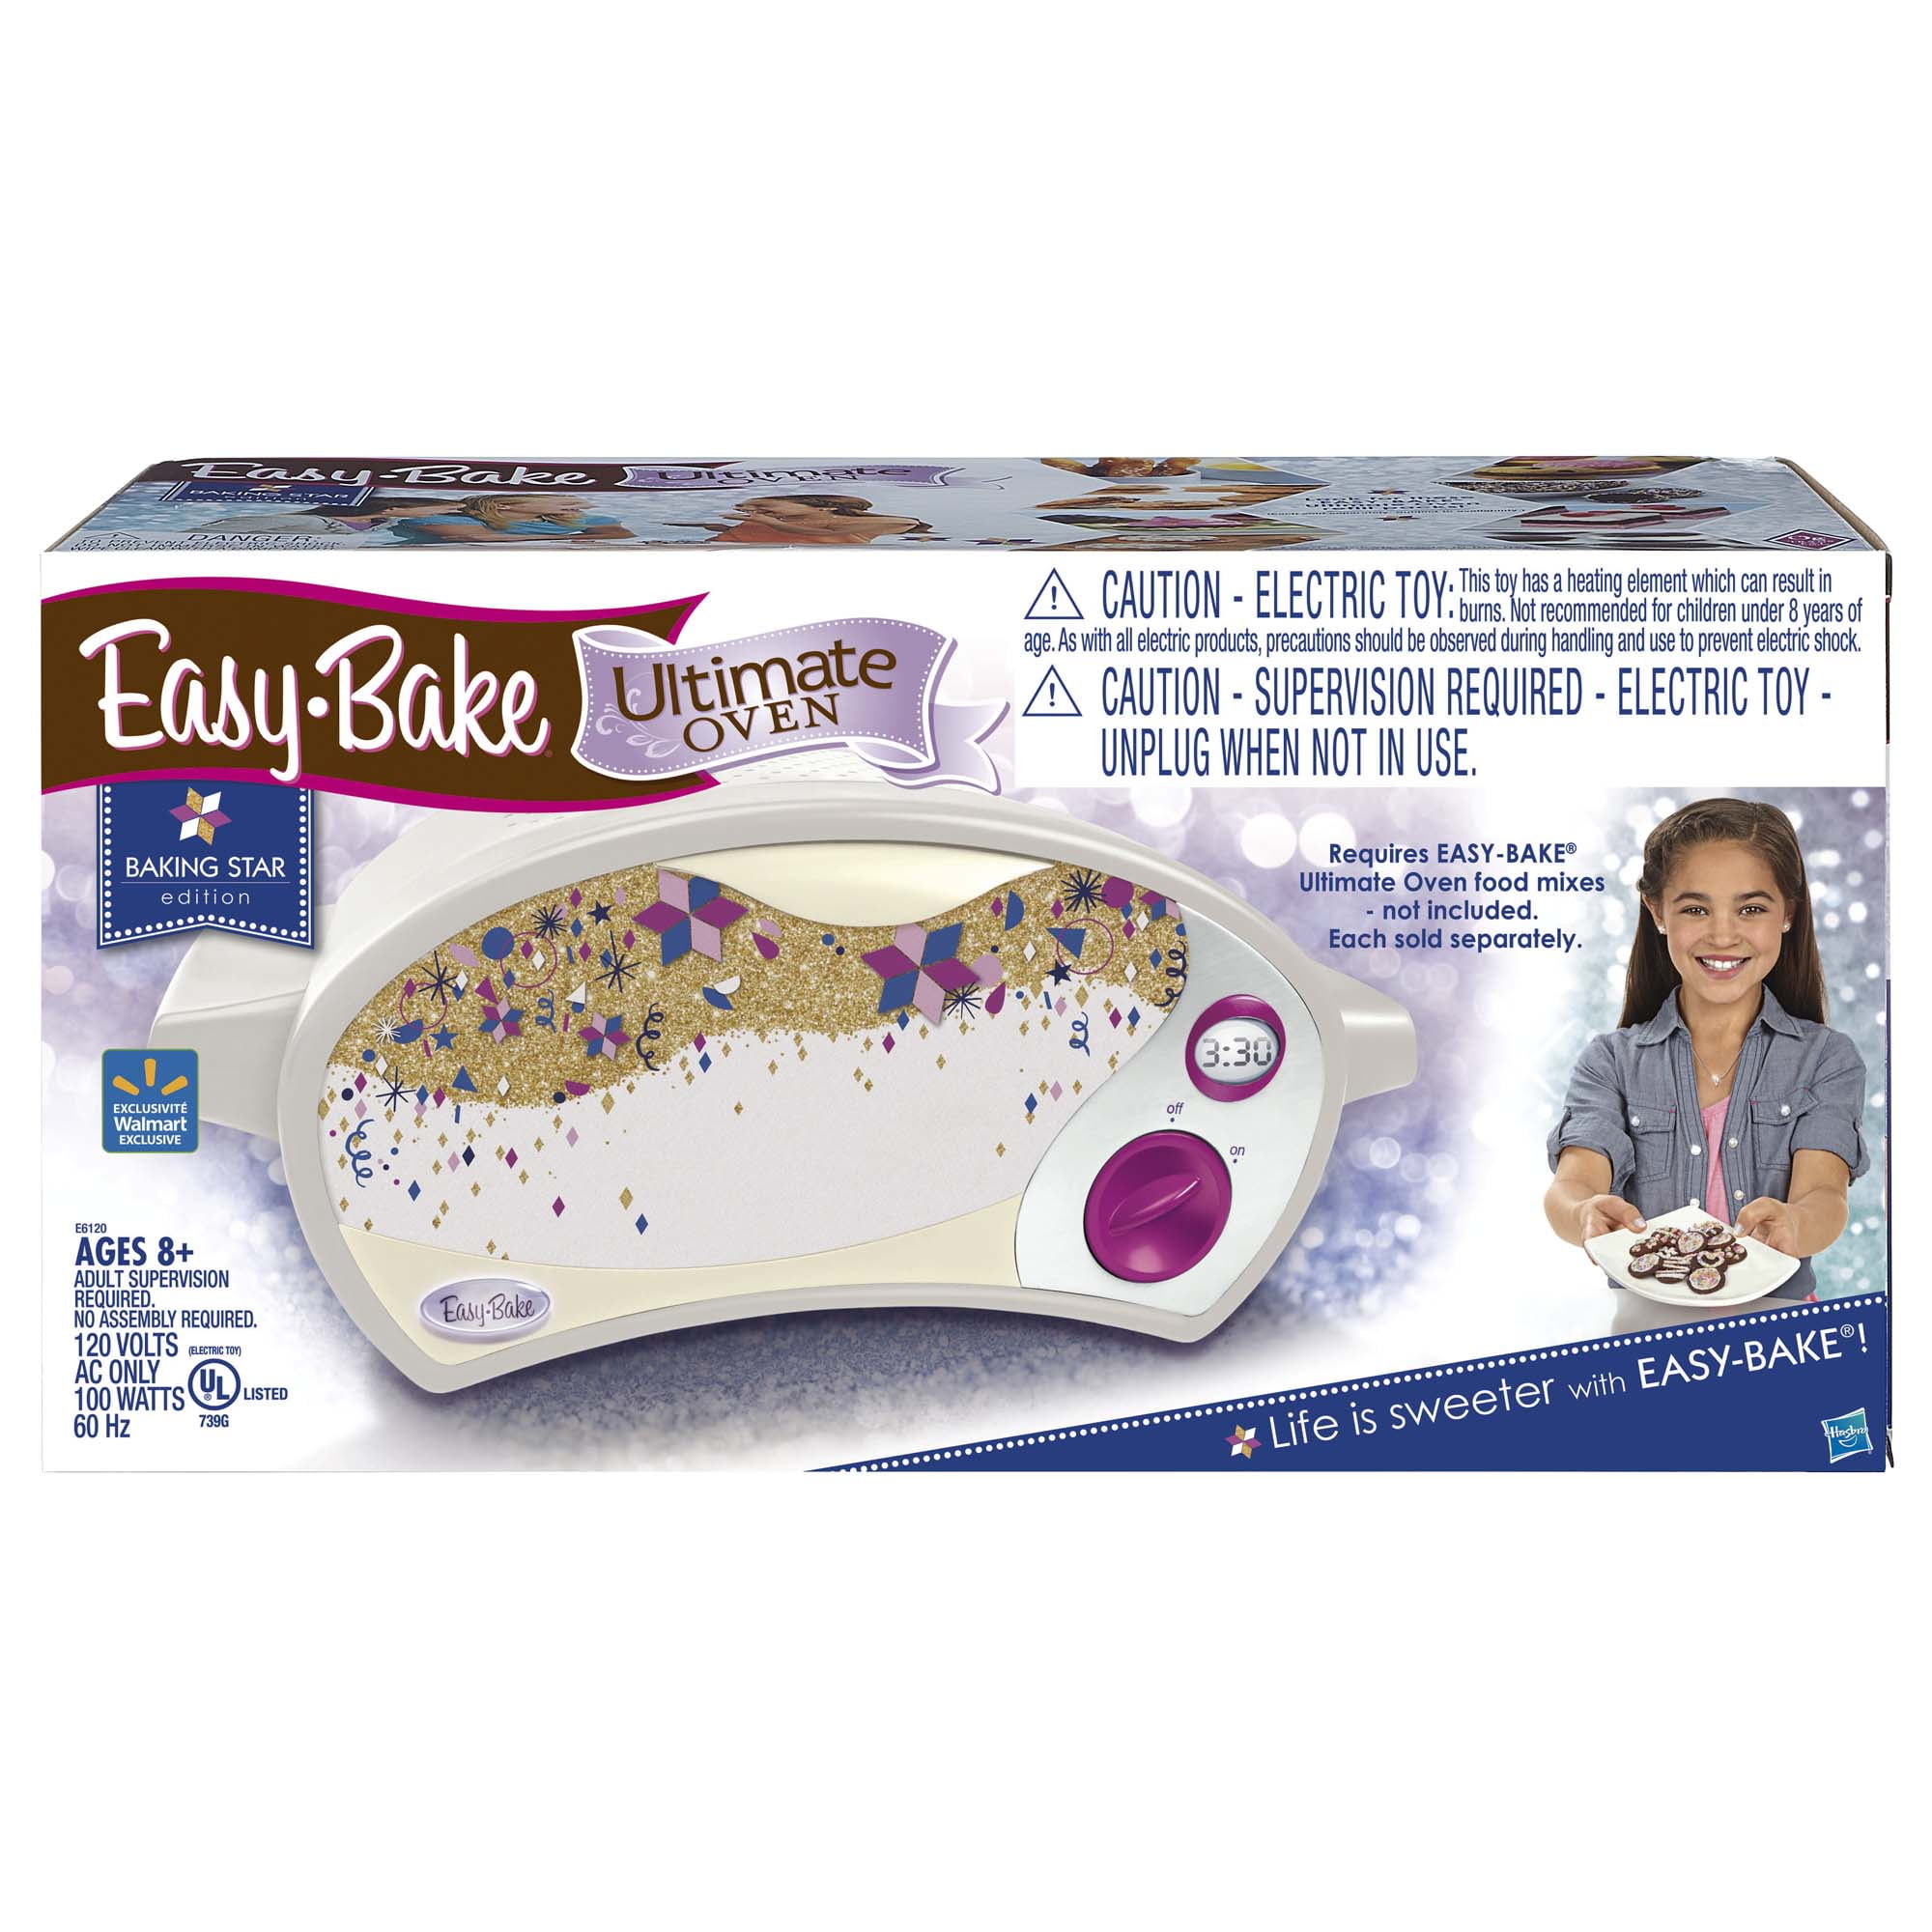 Details about   Easy-Bake Ultimate Oven Baking Star Edition Toy NEW 